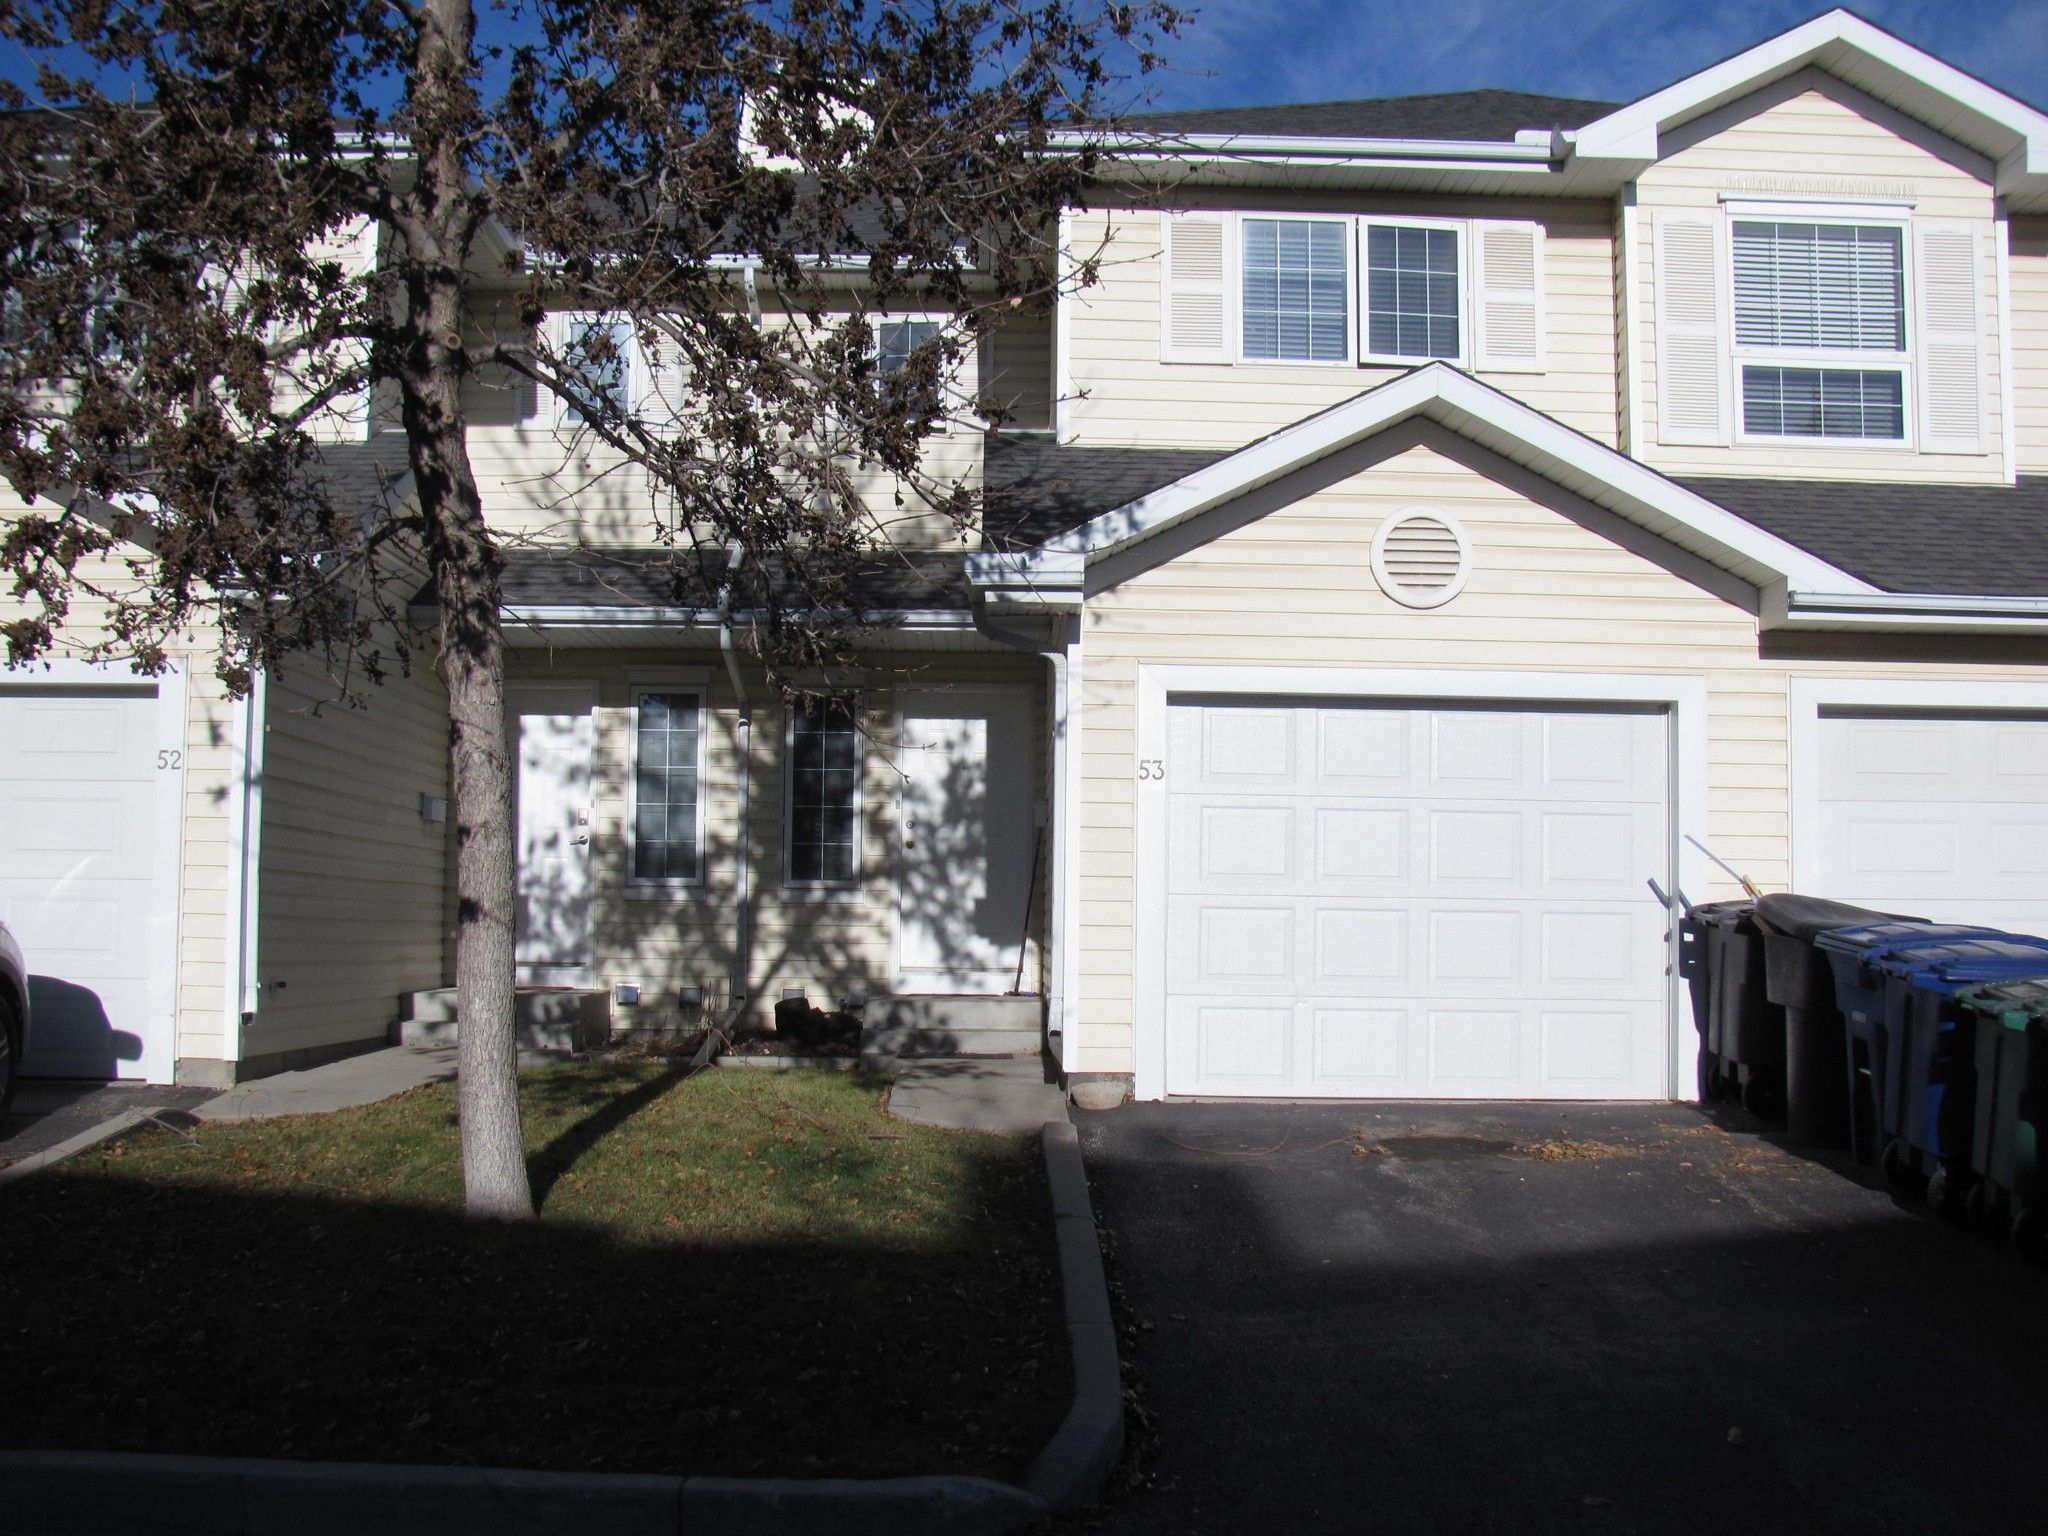 Main Photo: 53 111 Fairbrother Crescent in : Silverspring Townhouse (Condo) for sale (Saskatoon) 